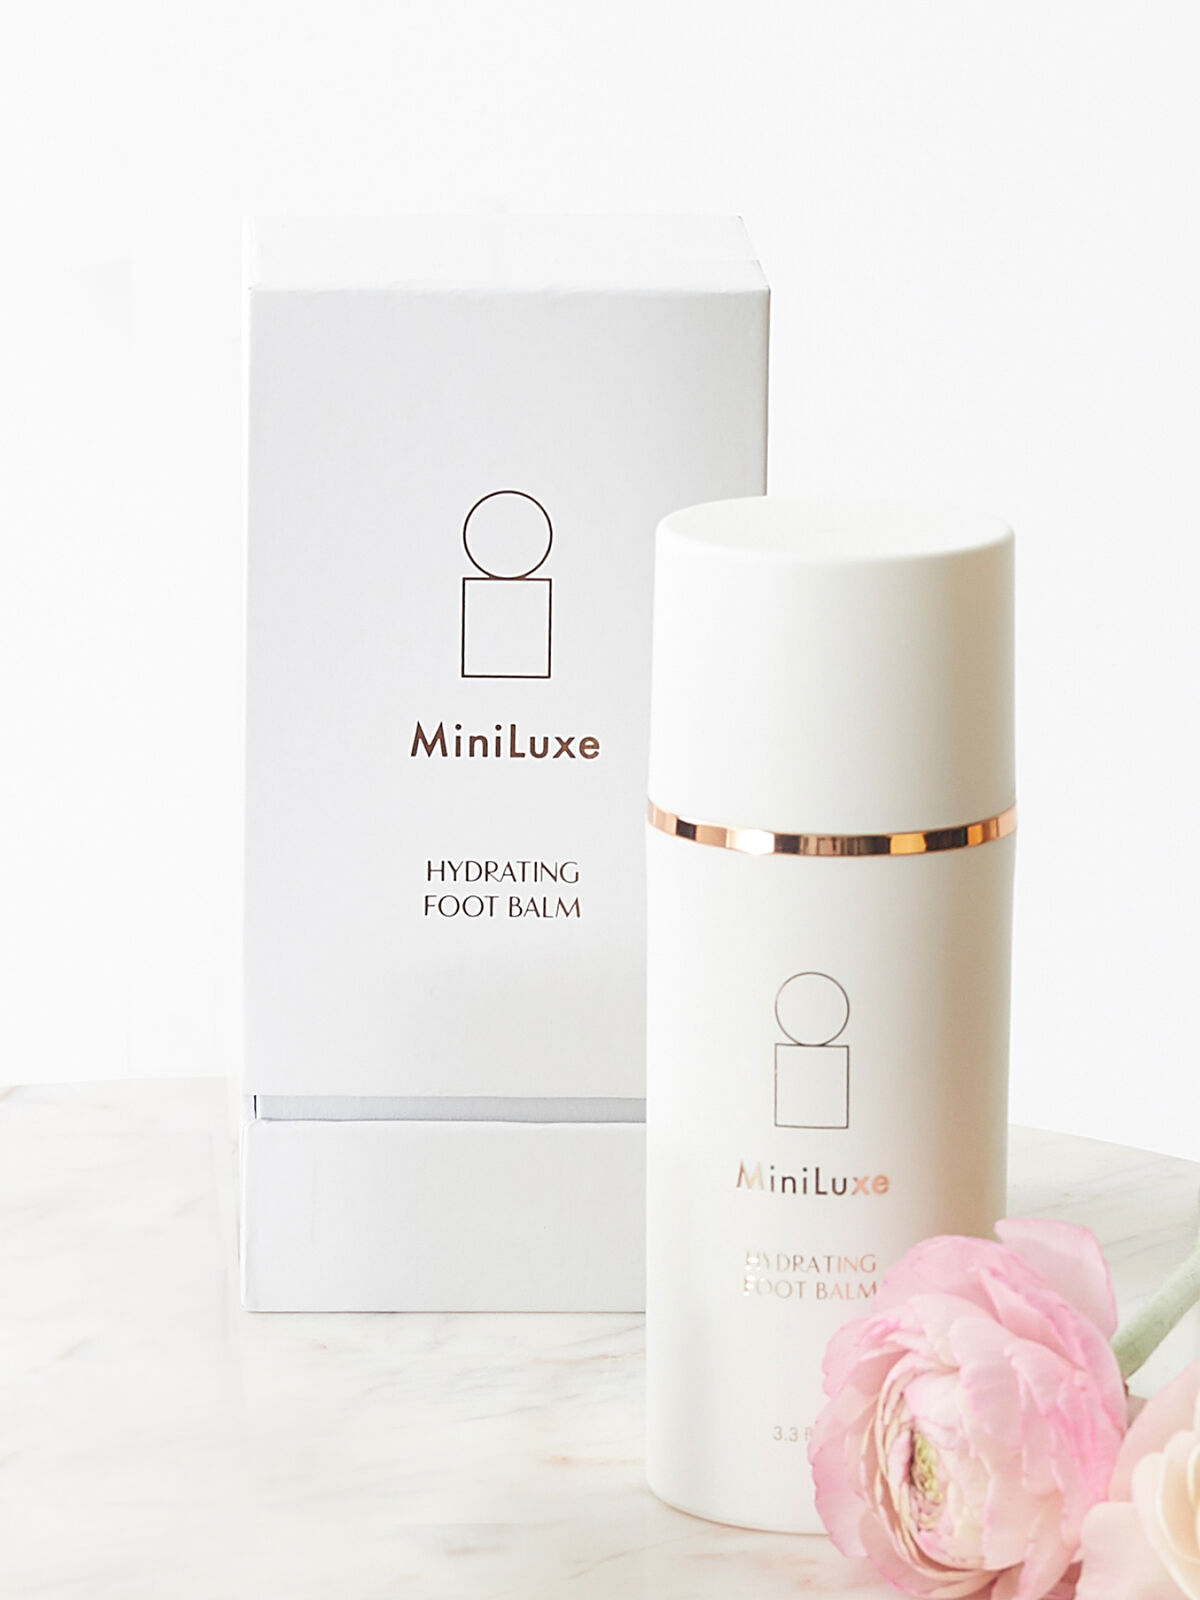 Miniluxe Hydrating Foot Balm